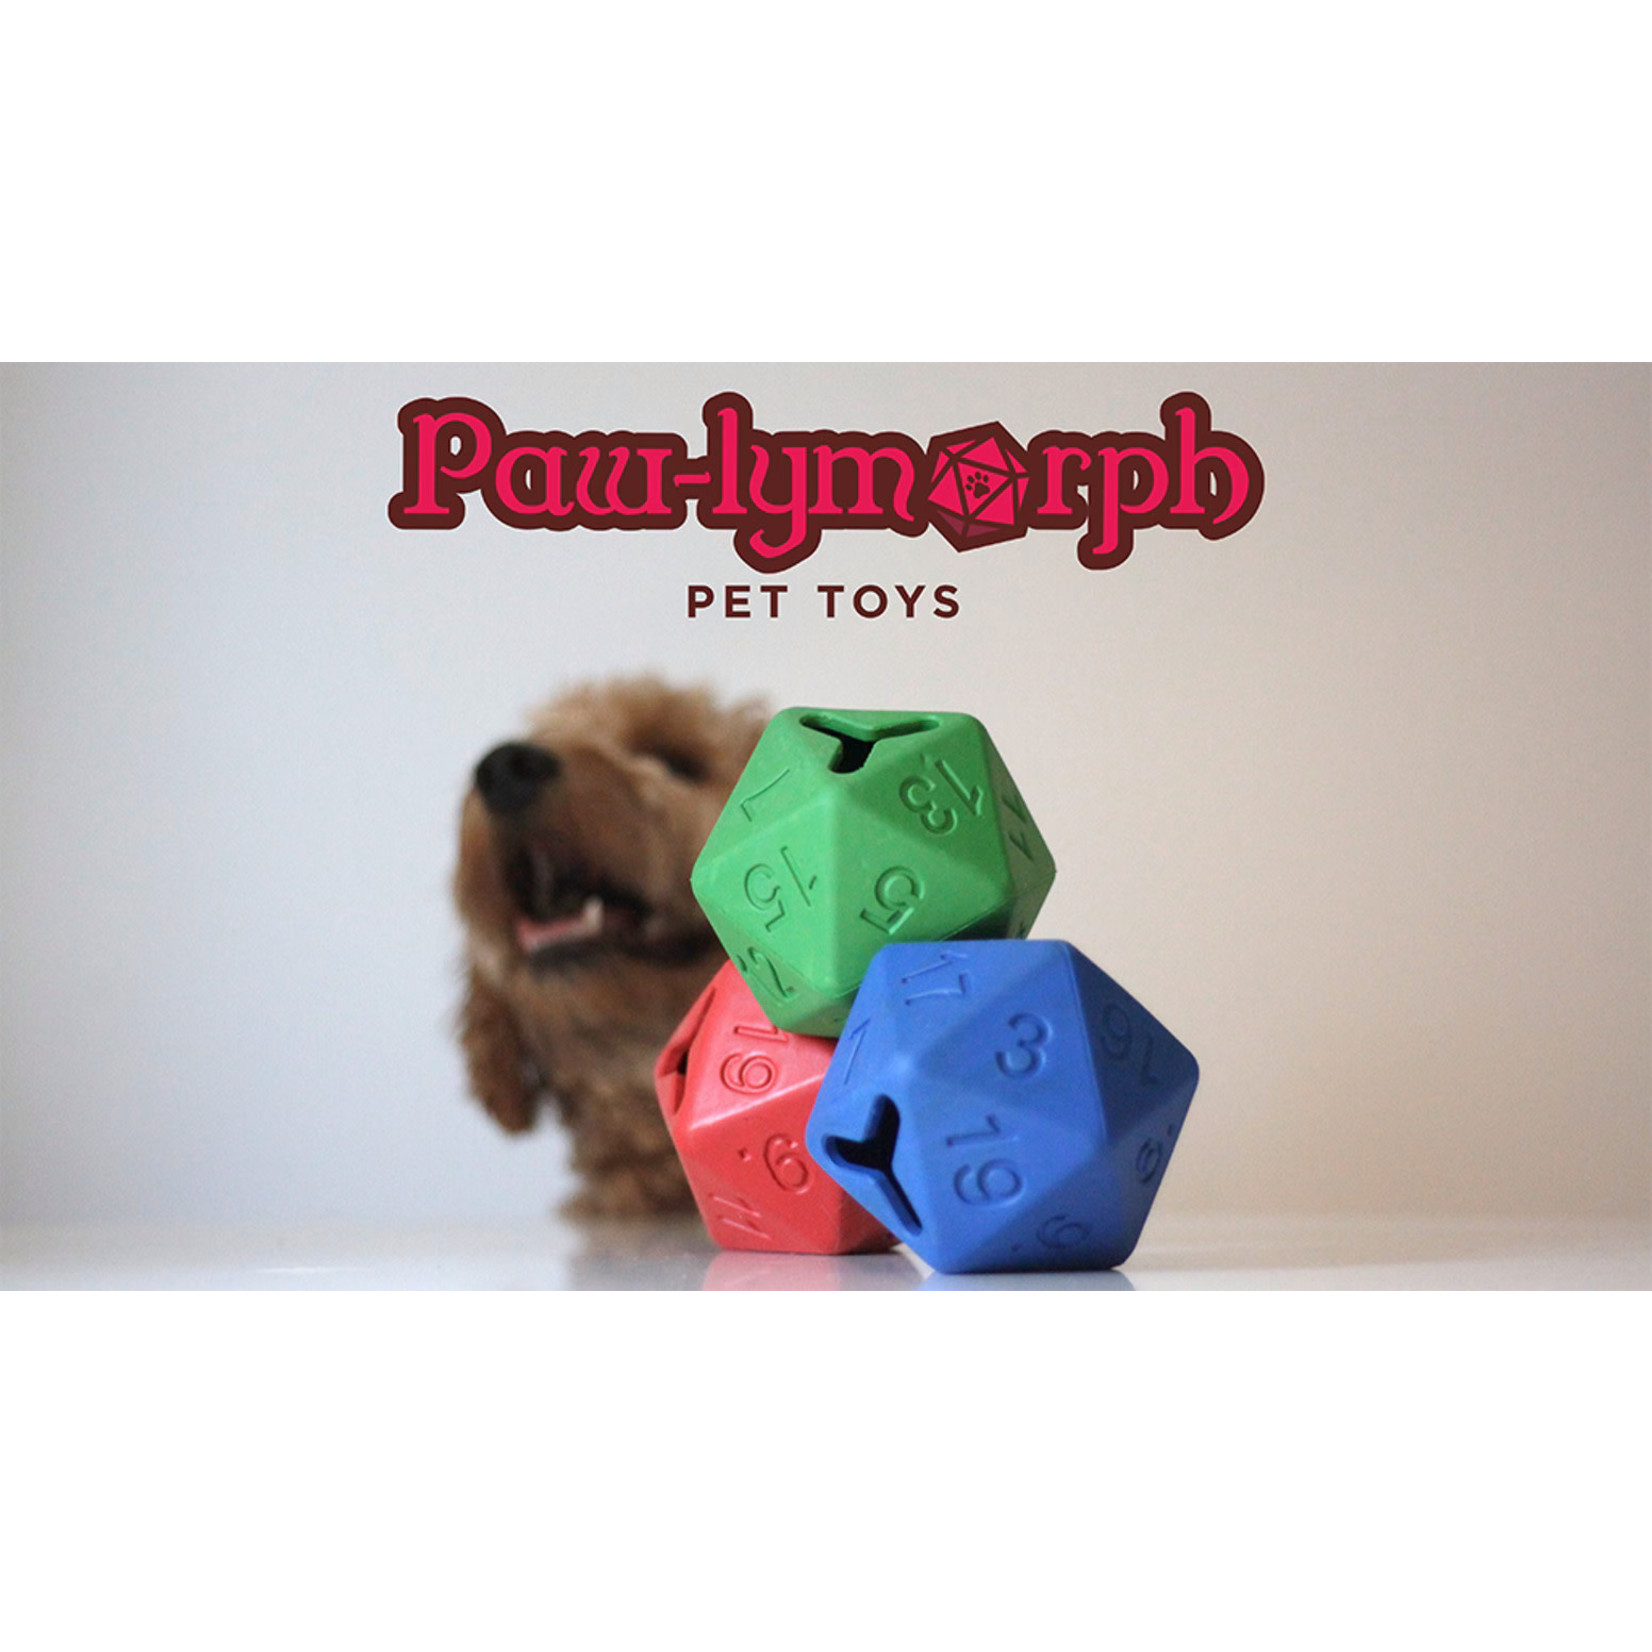 Paw-lymorph Pet Toys D20 Dog Toy (Fire Red)